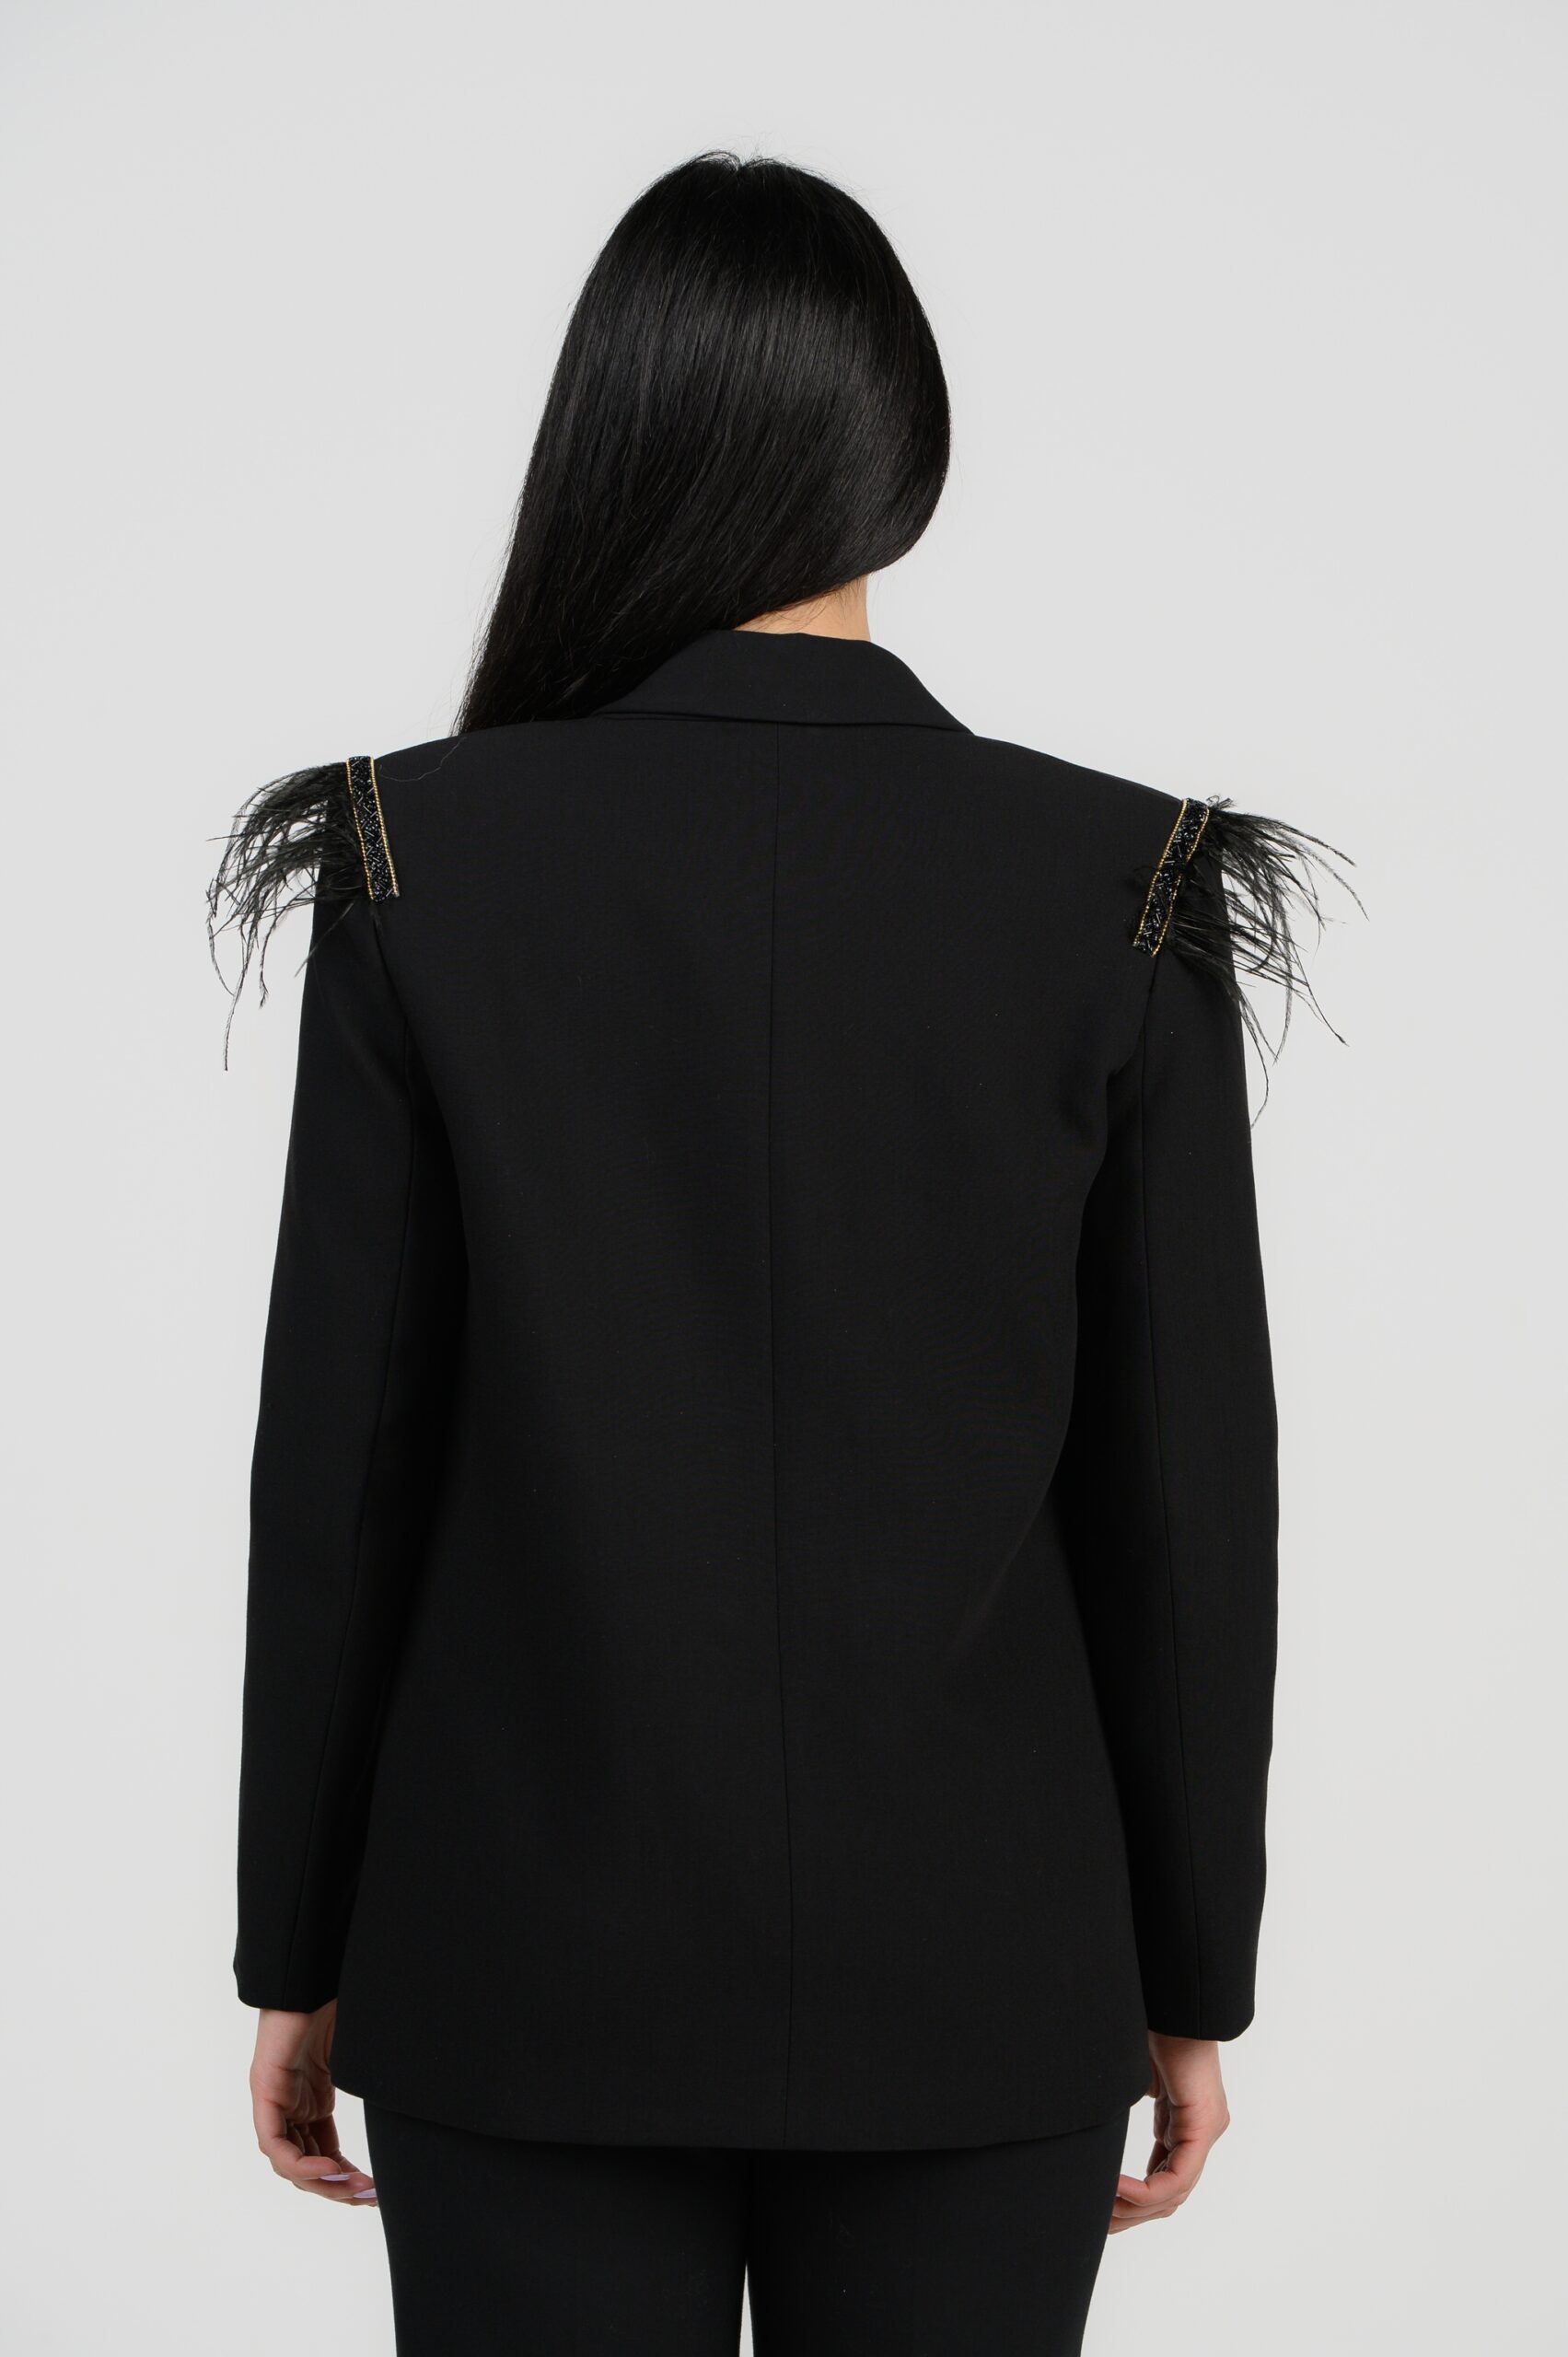 Black Blazer with feathers on shoulders